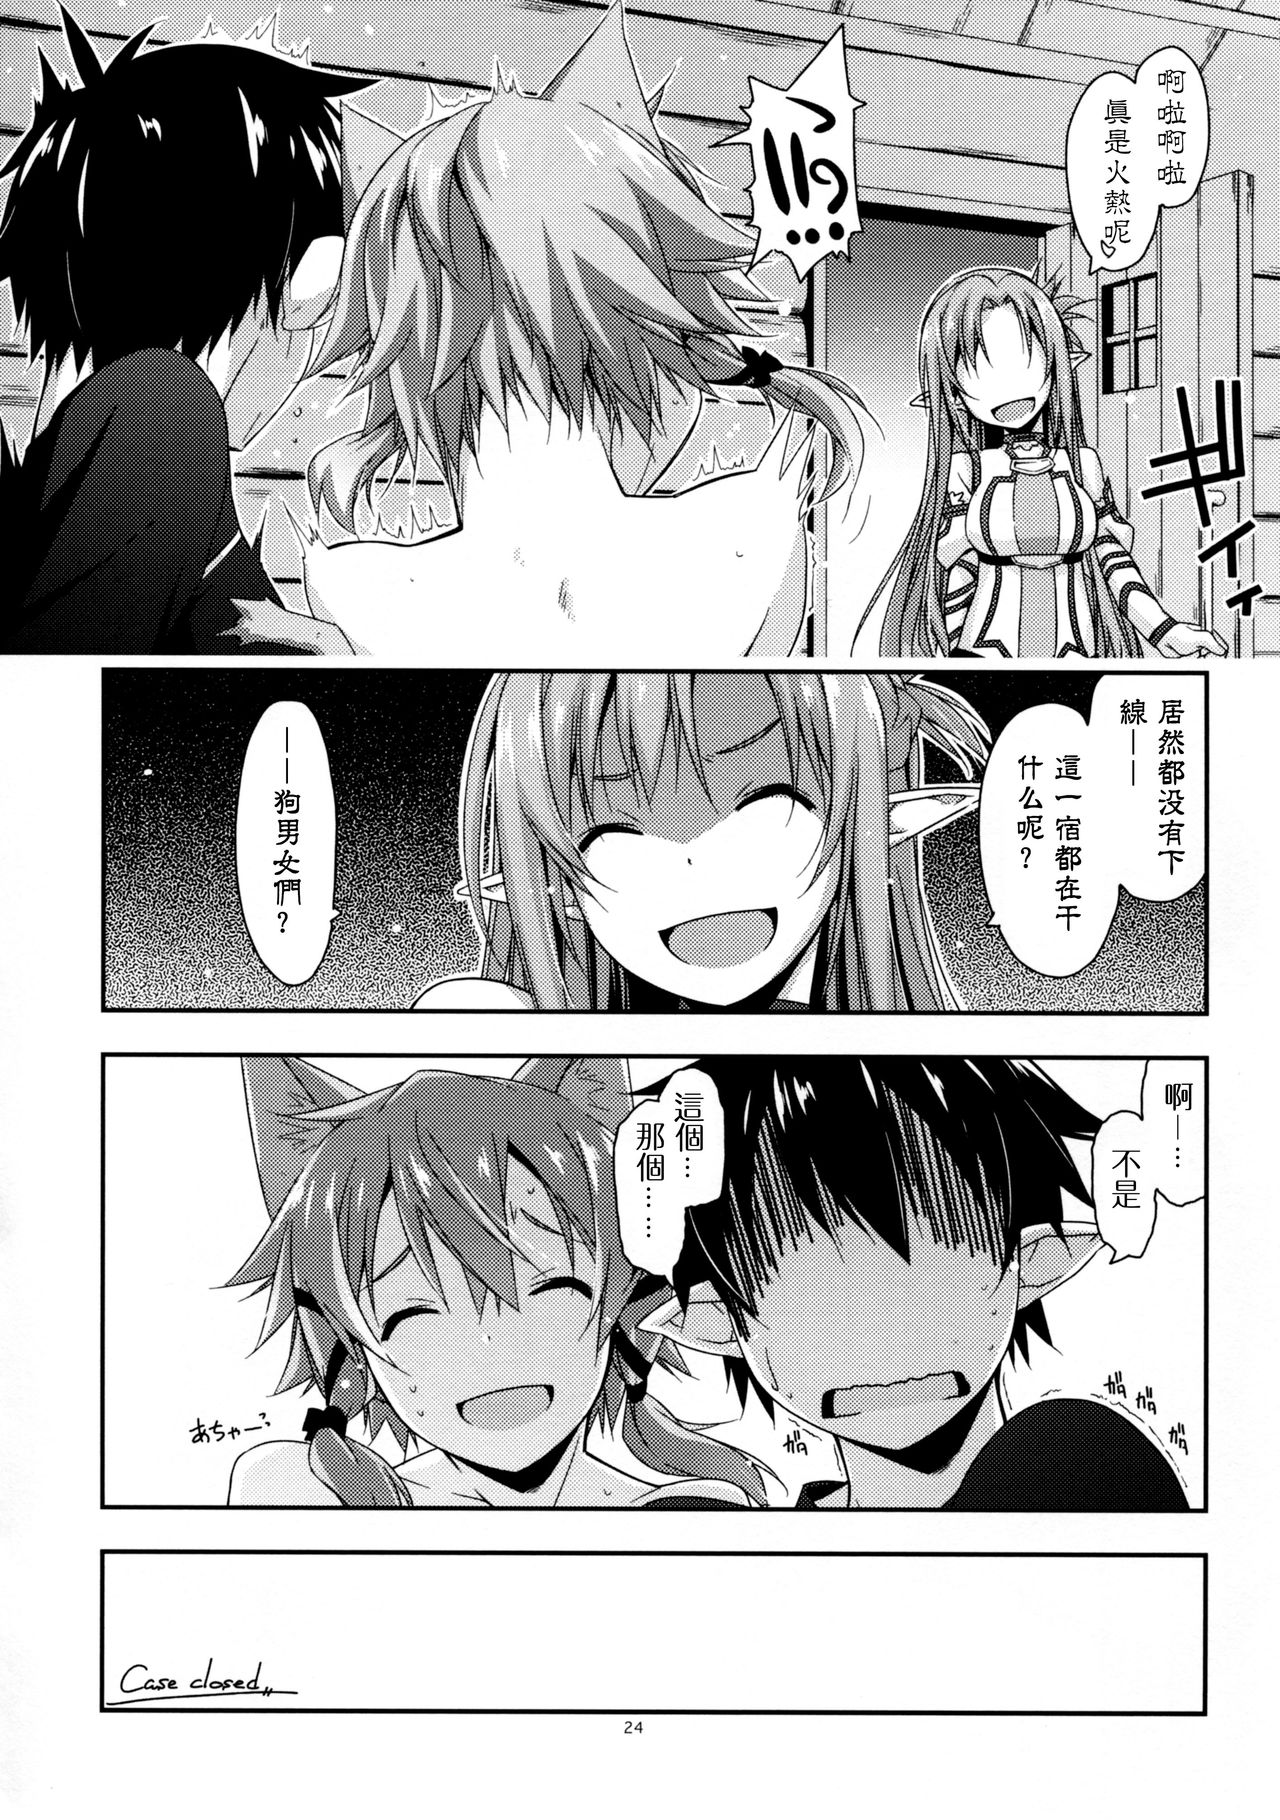 (C90) [Angyadow (Shikei)] Case closed. (Sword Art Online) [Chinese] [嗶咔嗶咔漢化組] page 25 full